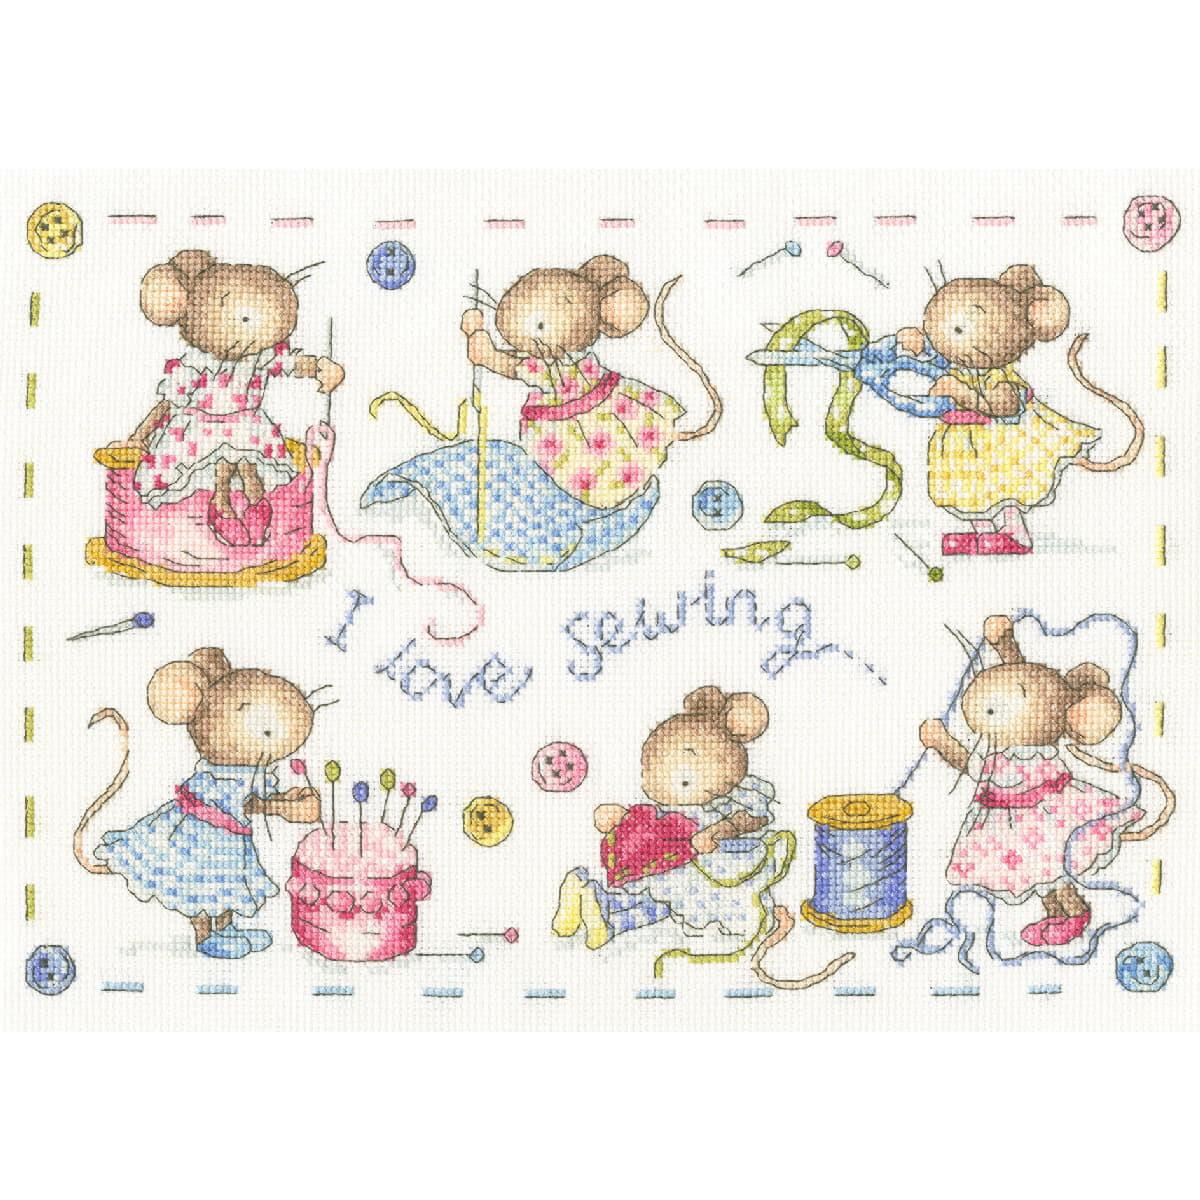 A group of mice are busy sewing an embroidery pack from...